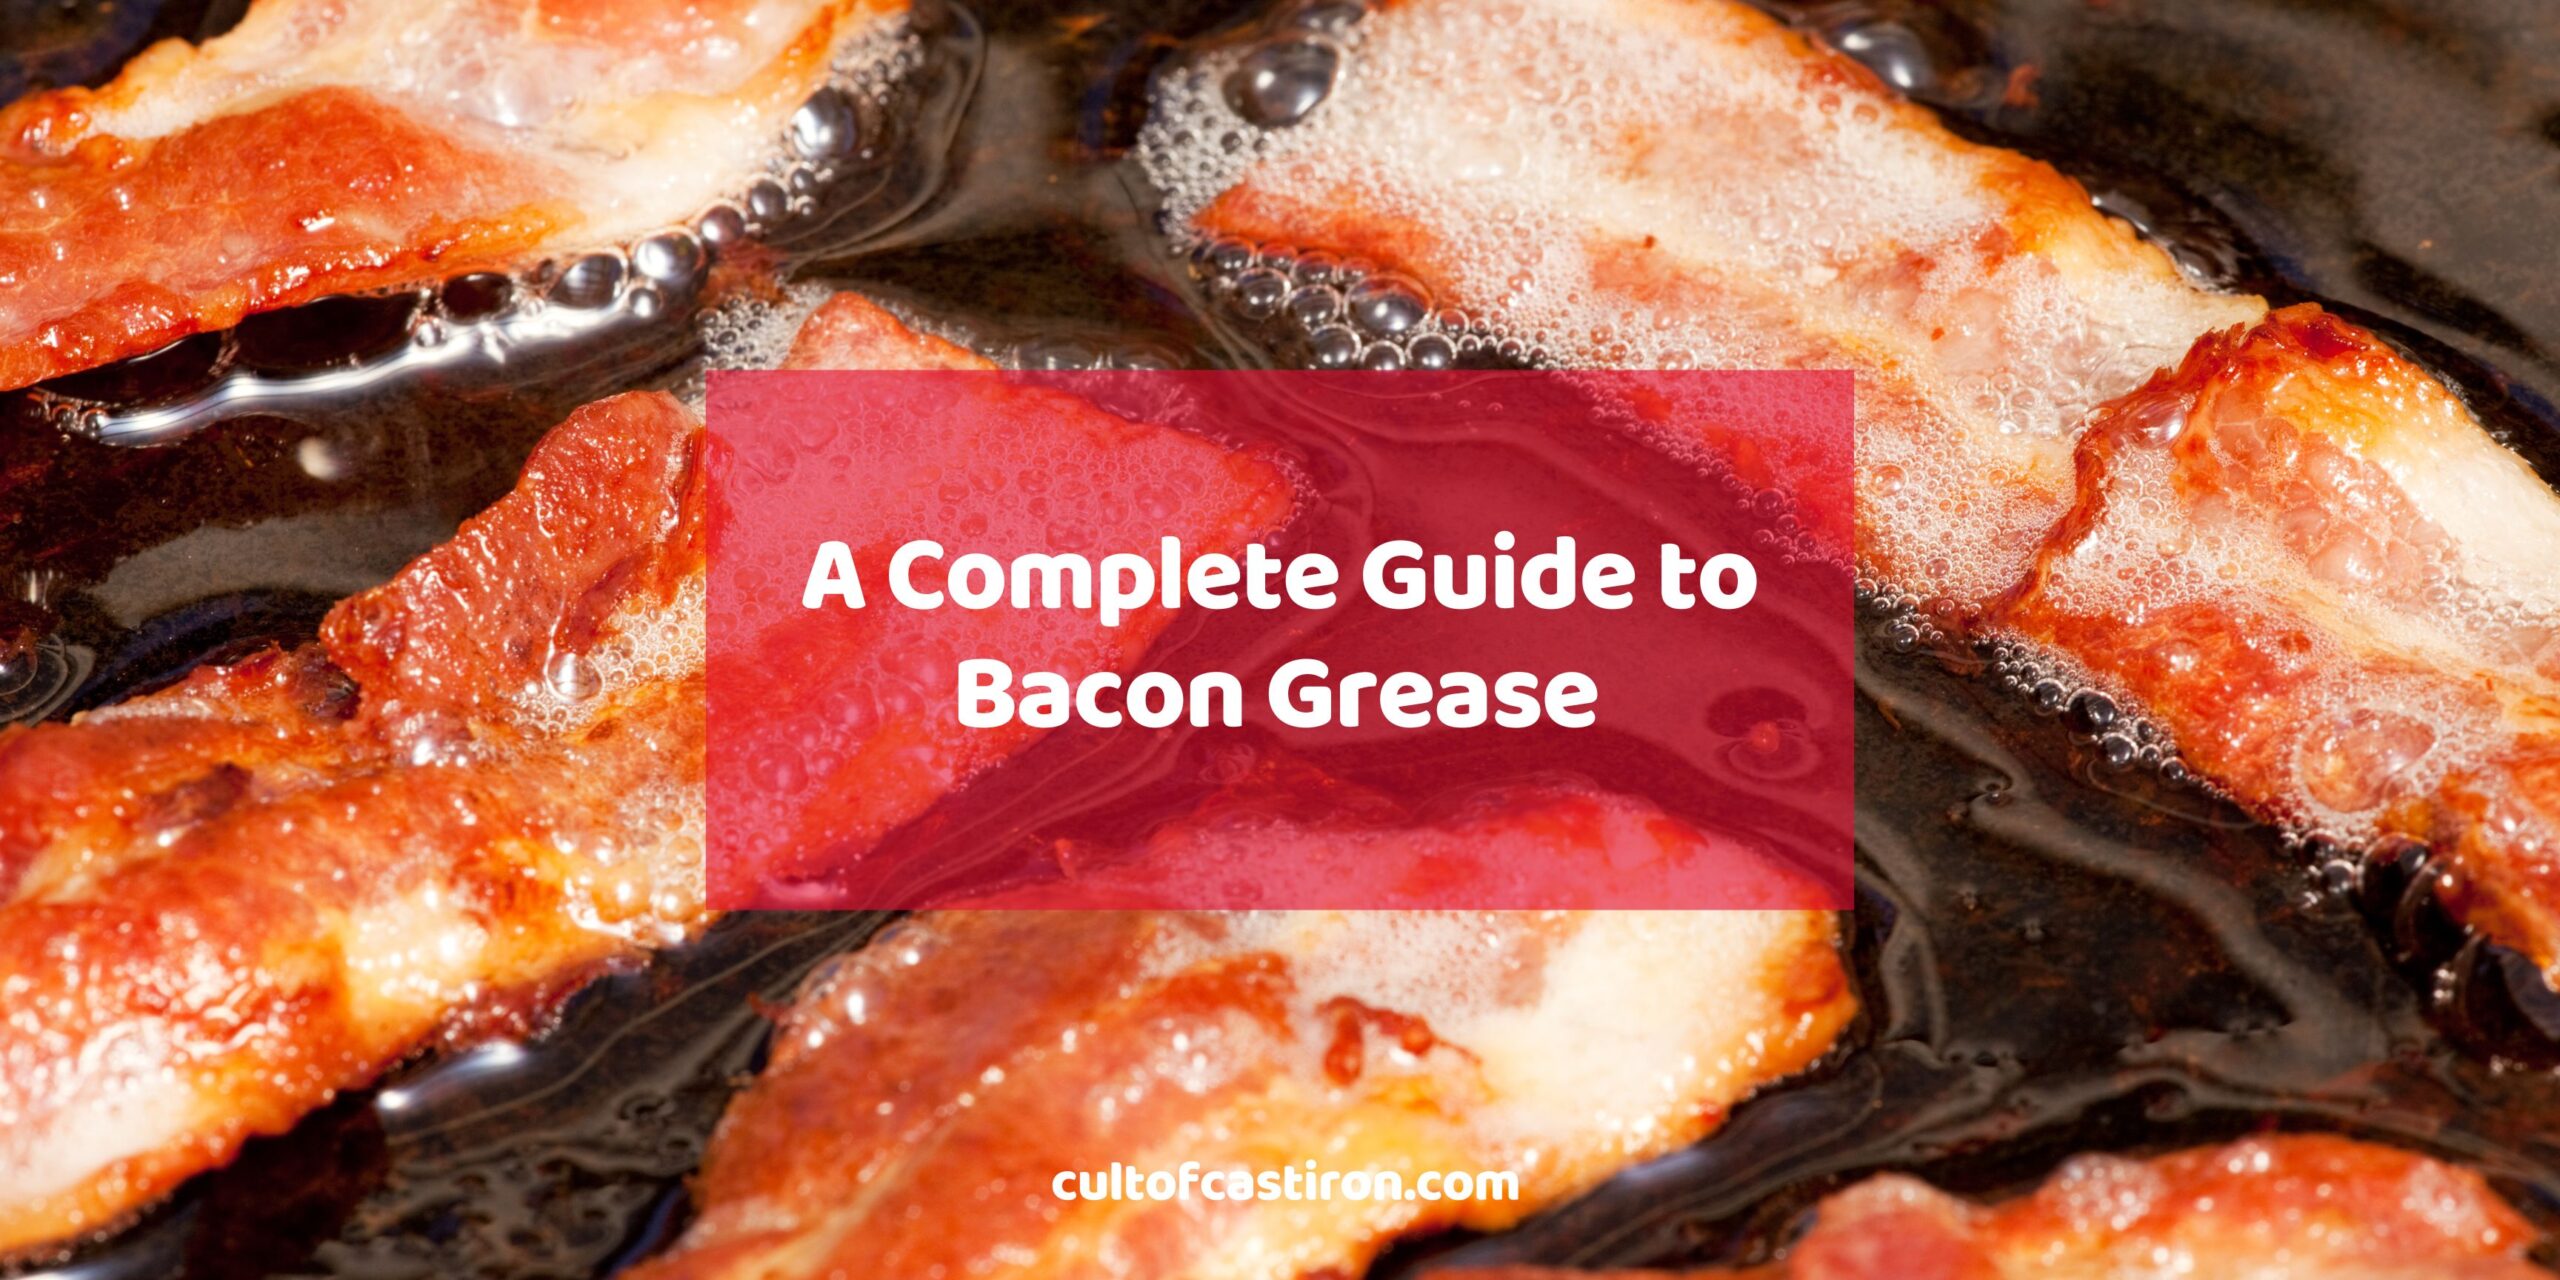 How to Safely Collect, Store, and Cook With Bacon Fat